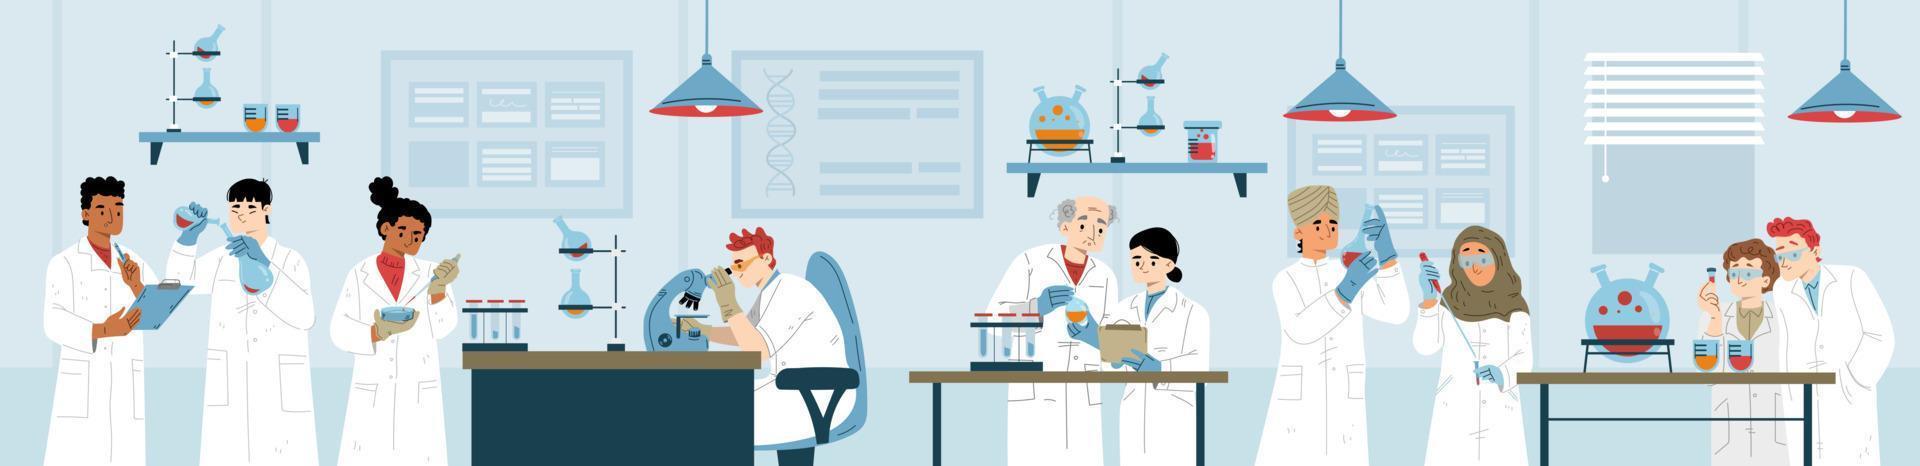 Science laboratory research and development work vector